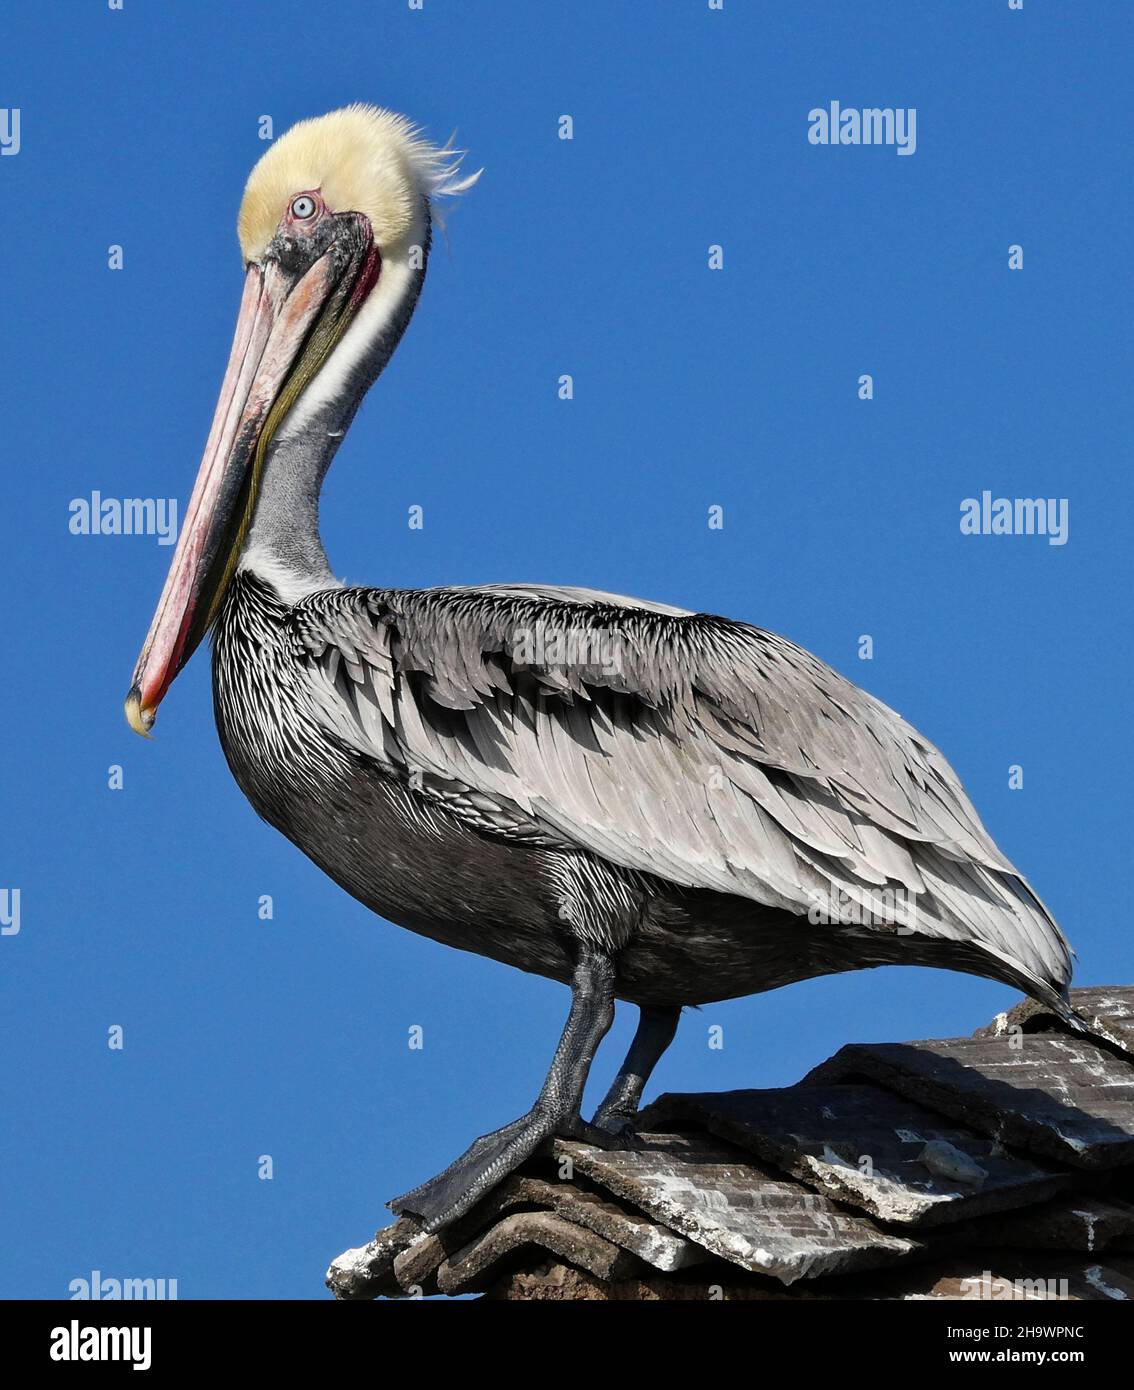 Brown pelican perched on rooftop, Huntington Beach, California Stock Photo